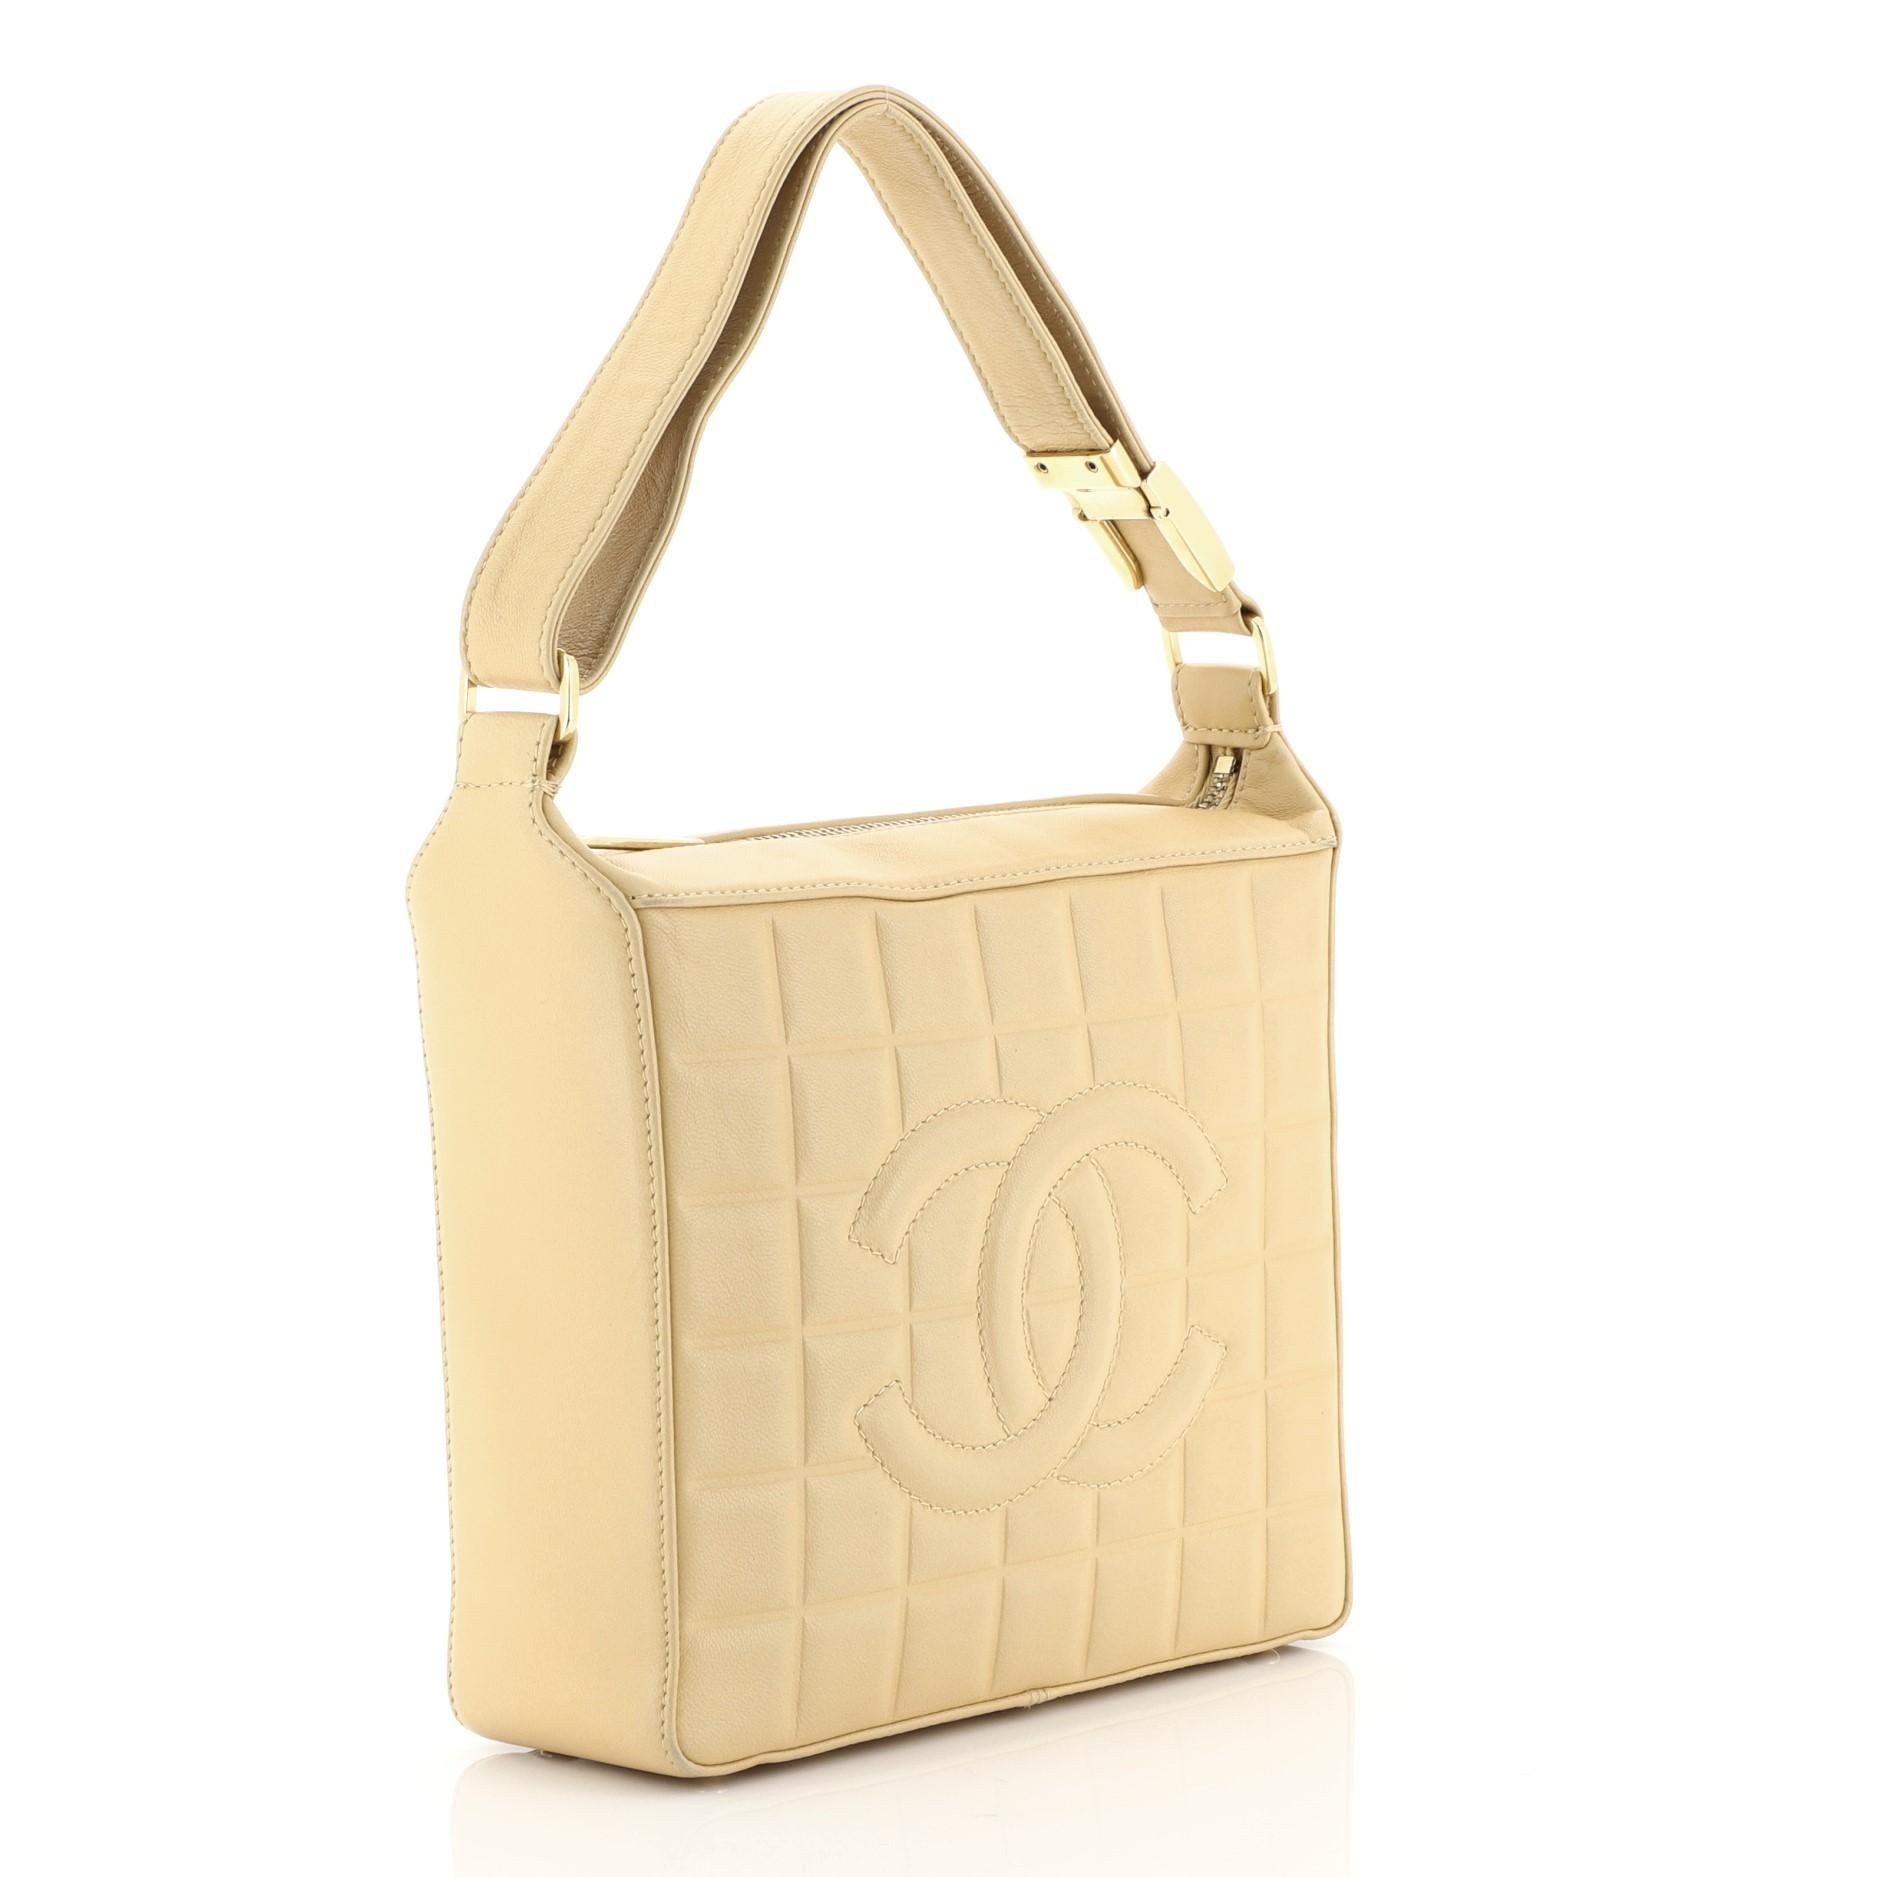 This Chanel Chocolate Bar CC Shoulder Bag Quilted Leather Small, crafted in neutral quilted leather, features long leather shoulder strap, square quilt design, and gold-tone hardware. Its zip closure opens to a neutral fabric interior with zip and